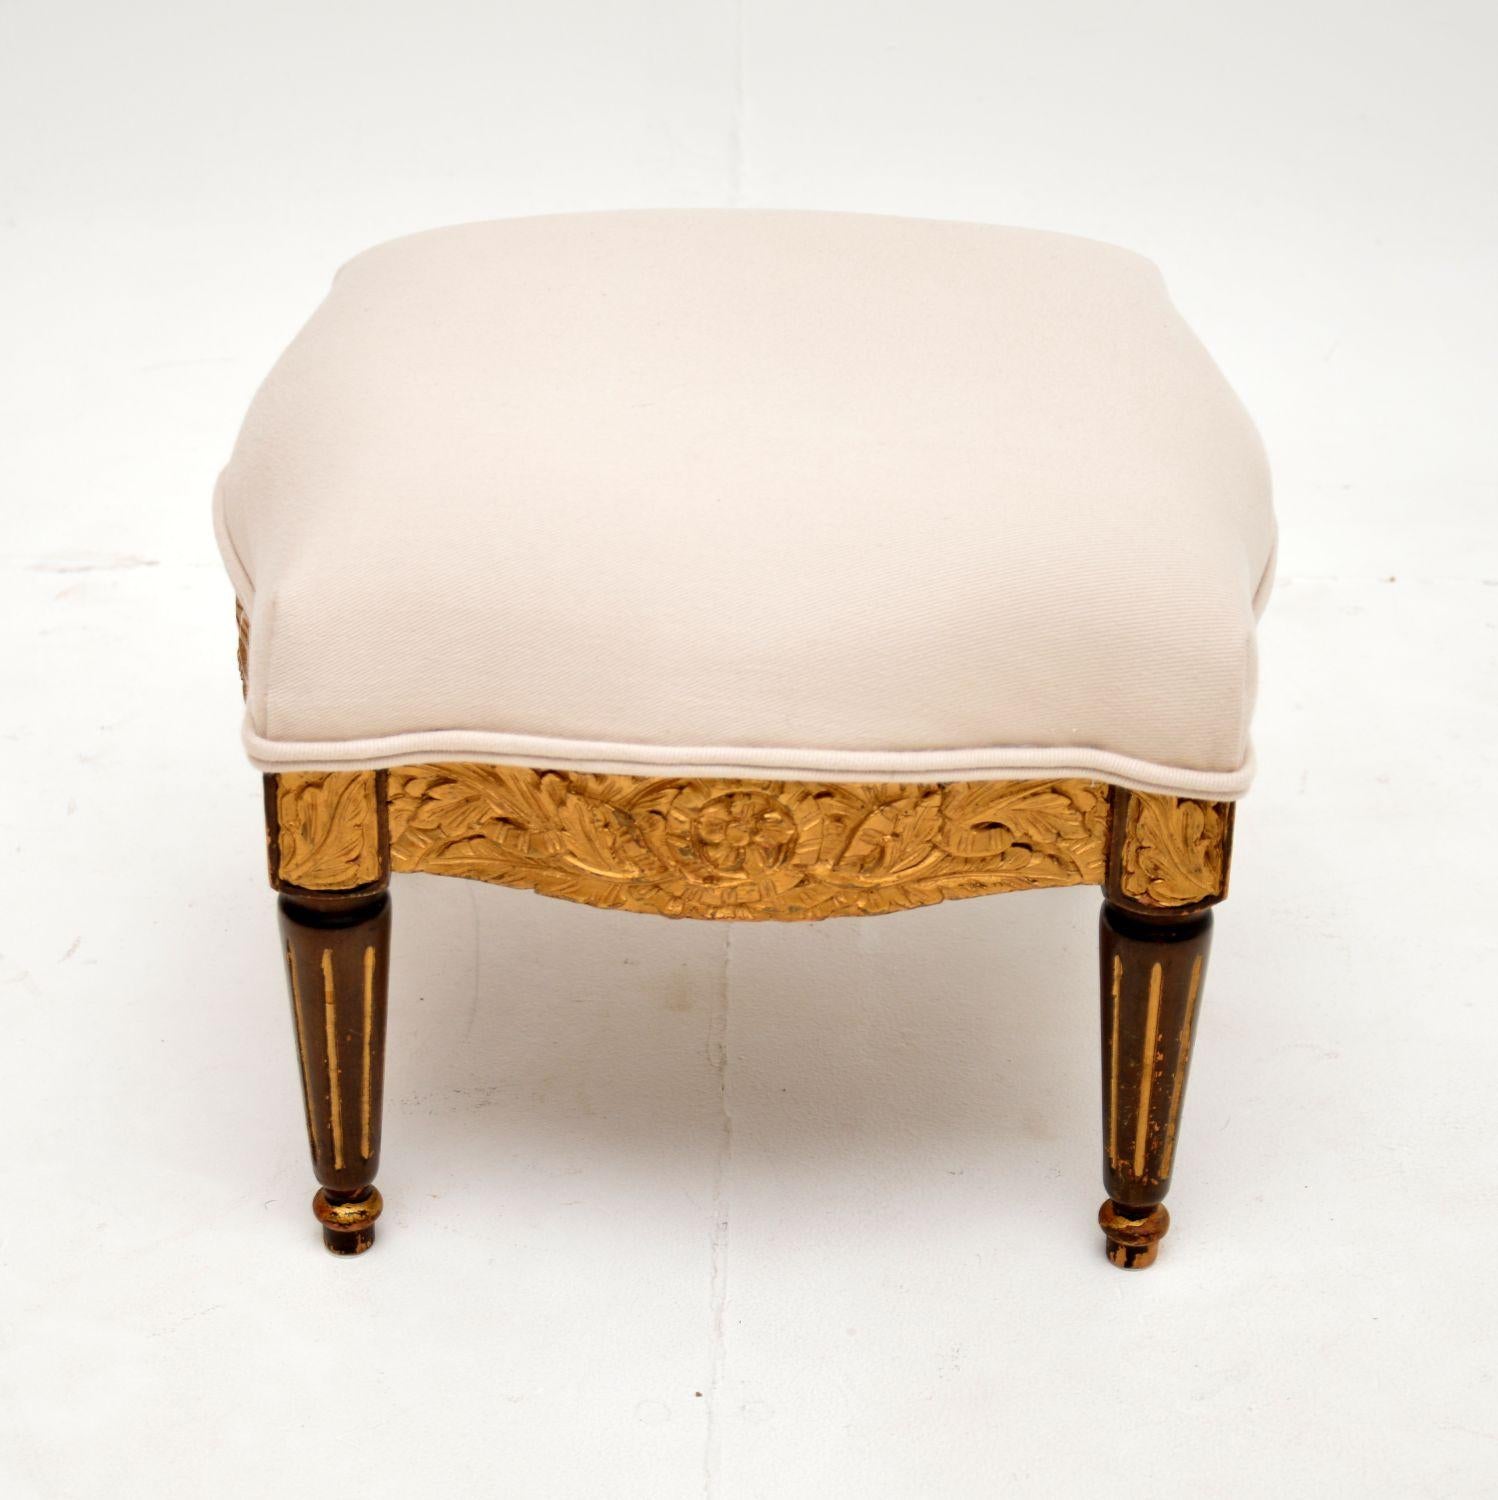 Louis XIV Antique French Carved Gilt Wood Stool